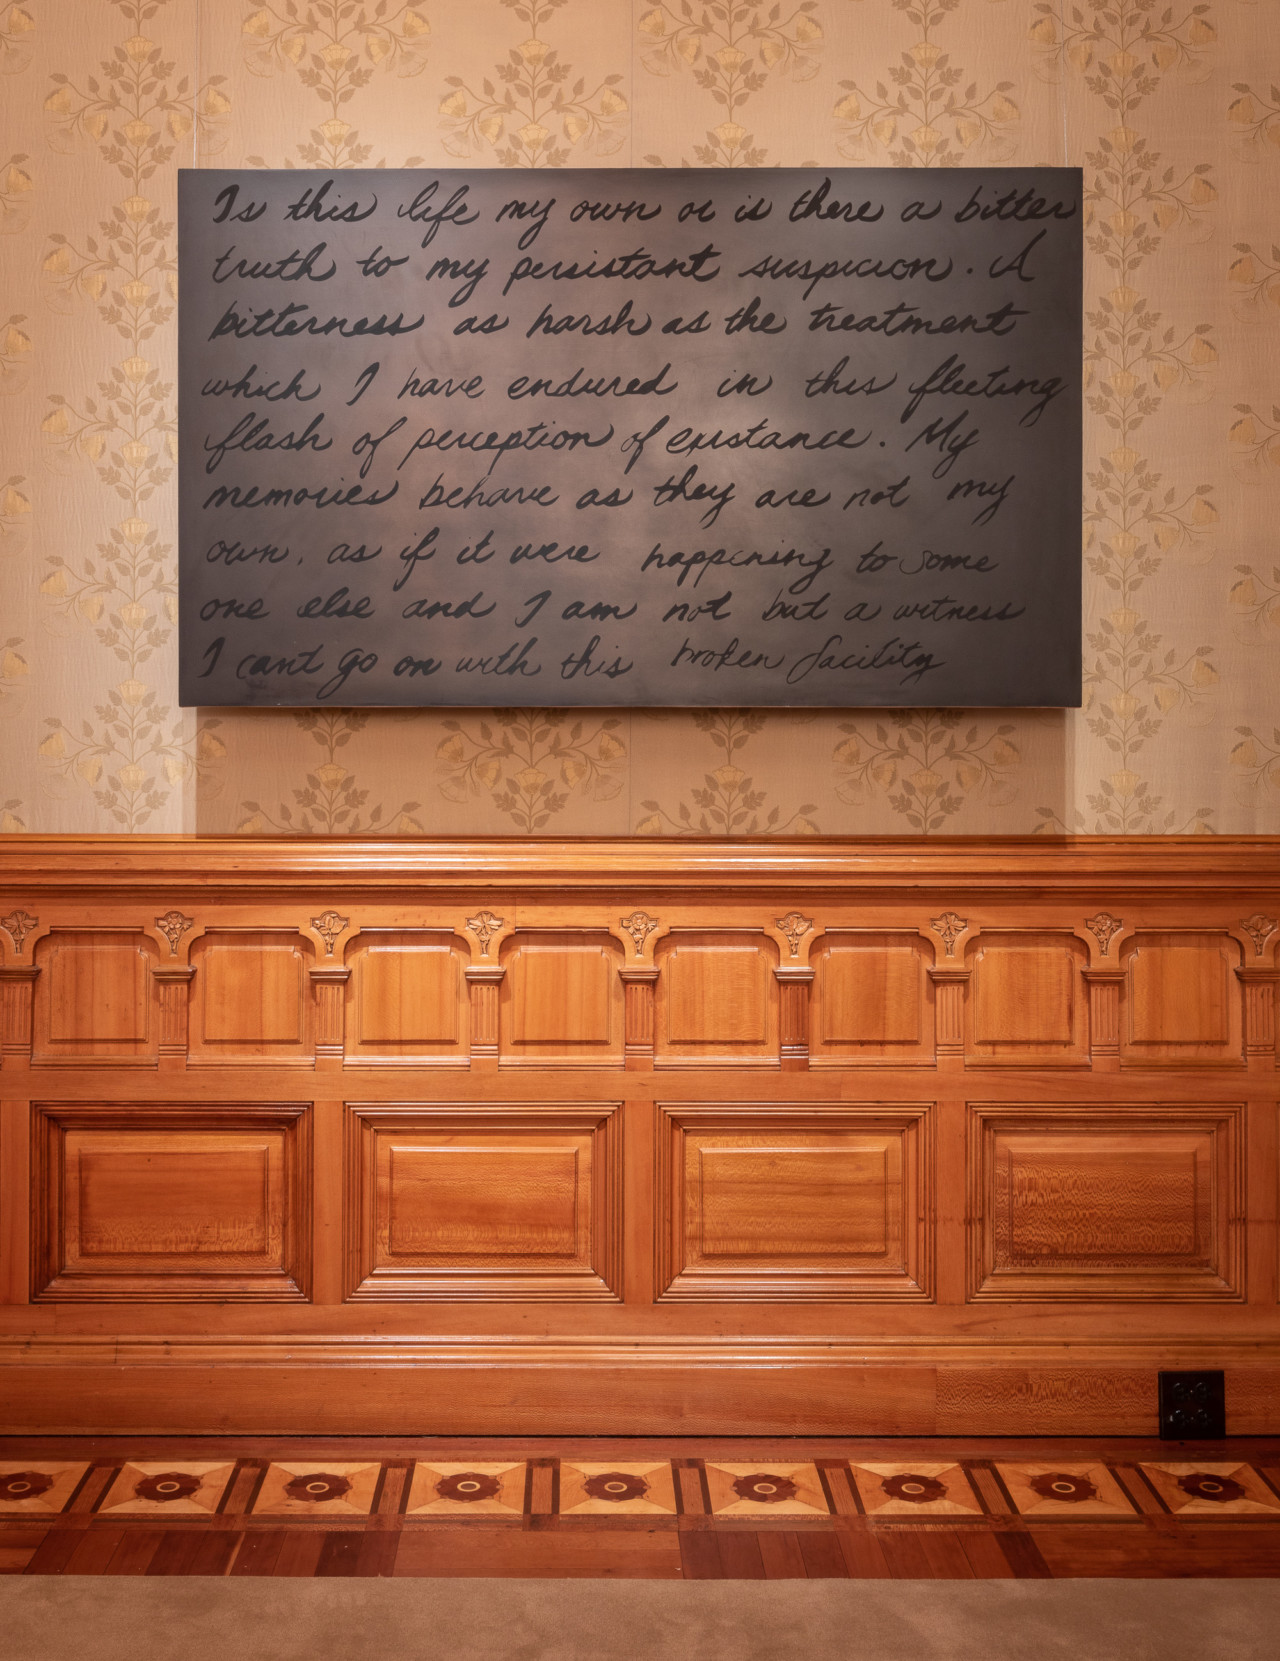 Painting of a letter on the wall at the Driehaus museum